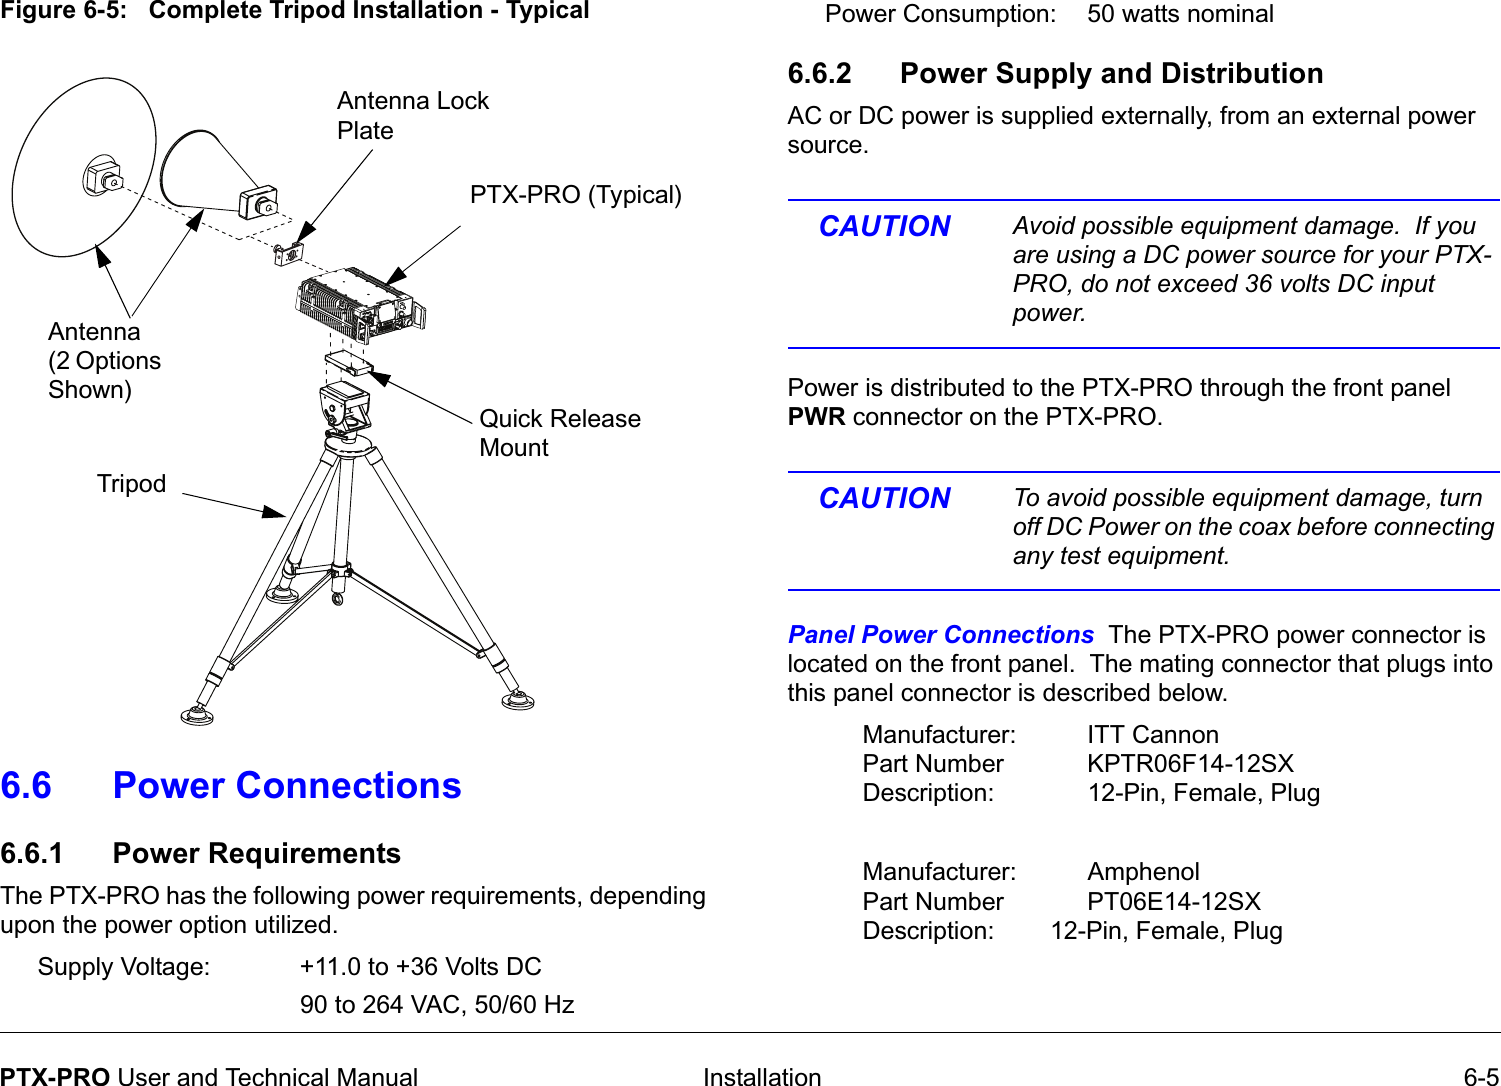  Installation 6-5PTX-PRO User and Technical ManualFigure 6-5:   Complete Tripod Installation - Typical6.6 Power Connections6.6.1 Power RequirementsThe PTX-PRO has the following power requirements, depending upon the power option utilized.Supply Voltage: +11.0 to +36 Volts DC90 to 264 VAC, 50/60 HzQuick Release Mount PTX-PRO (Typical)Antenna Lock PlateAntenna (2 Options Shown)TripodPower Consumption: 50 watts nominal 6.6.2 Power Supply and DistributionAC or DC power is supplied externally, from an external power source. CAUTION Avoid possible equipment damage.  If you are using a DC power source for your PTX-PRO, do not exceed 36 volts DC input power. Power is distributed to the PTX-PRO through the front panel PWR connector on the PTX-PRO.   CAUTION To avoid possible equipment damage, turn off DC Power on the coax before connecting any test equipment. Panel Power Connections  The PTX-PRO power connector is located on the front panel.  The mating connector that plugs into this panel connector is described below.Manufacturer: ITT CannonPart Number KPTR06F14-12SXDescription: 12-Pin, Female, Plug Manufacturer: AmphenolPart Number PT06E14-12SXDescription: 12-Pin, Female, Plug